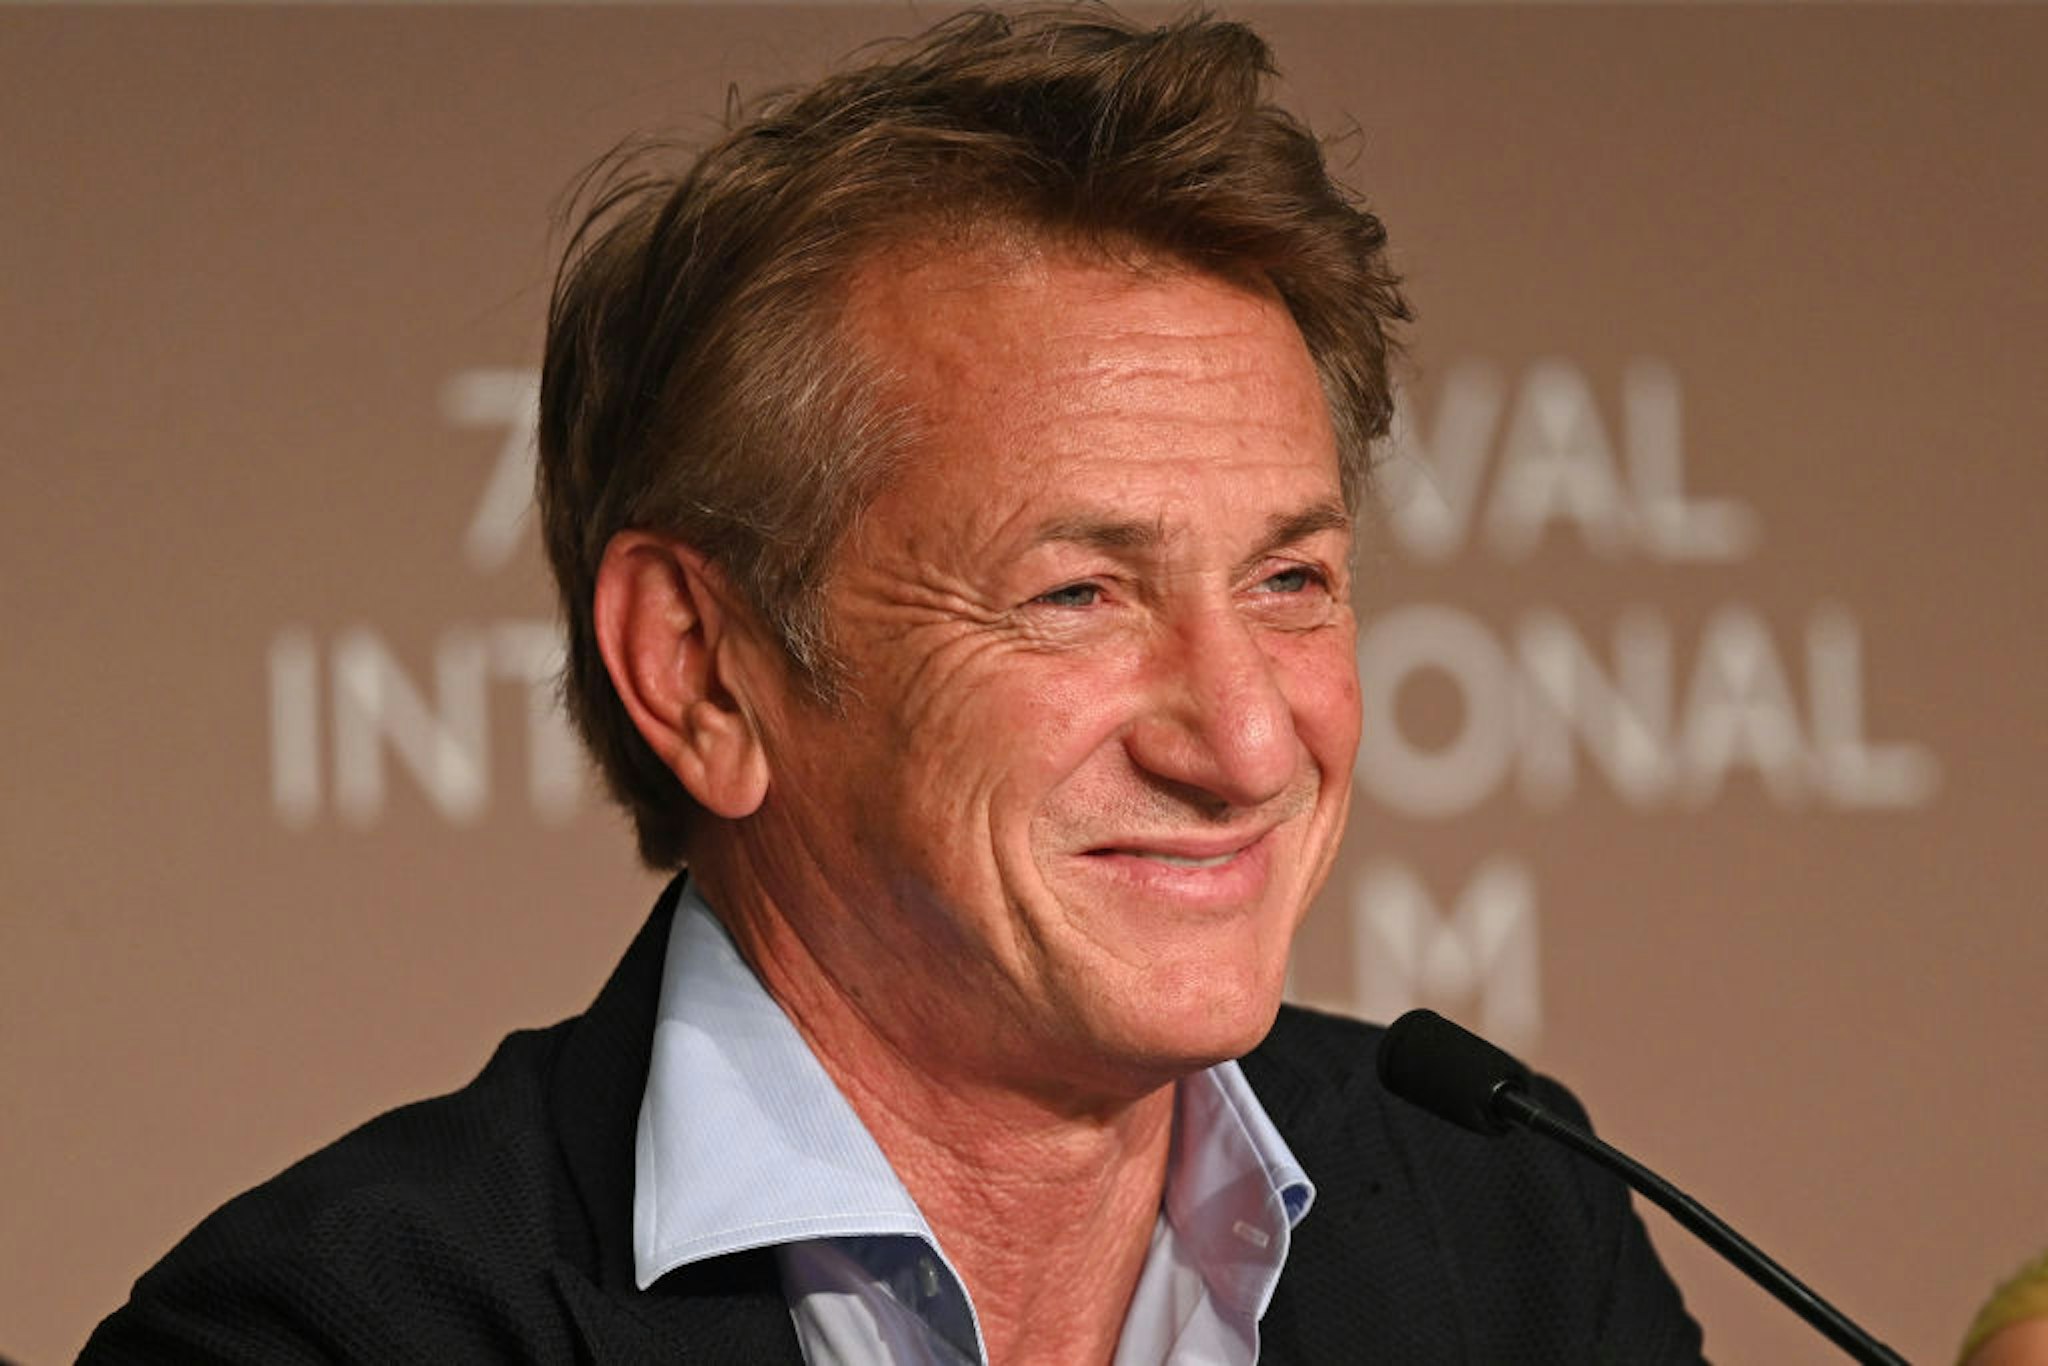 CANNES, FRANCE - JULY 11: Sean Penn attends the "Flag Day" press conference during the 74th annual Cannes Film Festival on July 11, 2021 in Cannes, France. (Photo by Kate Green/Getty Images)